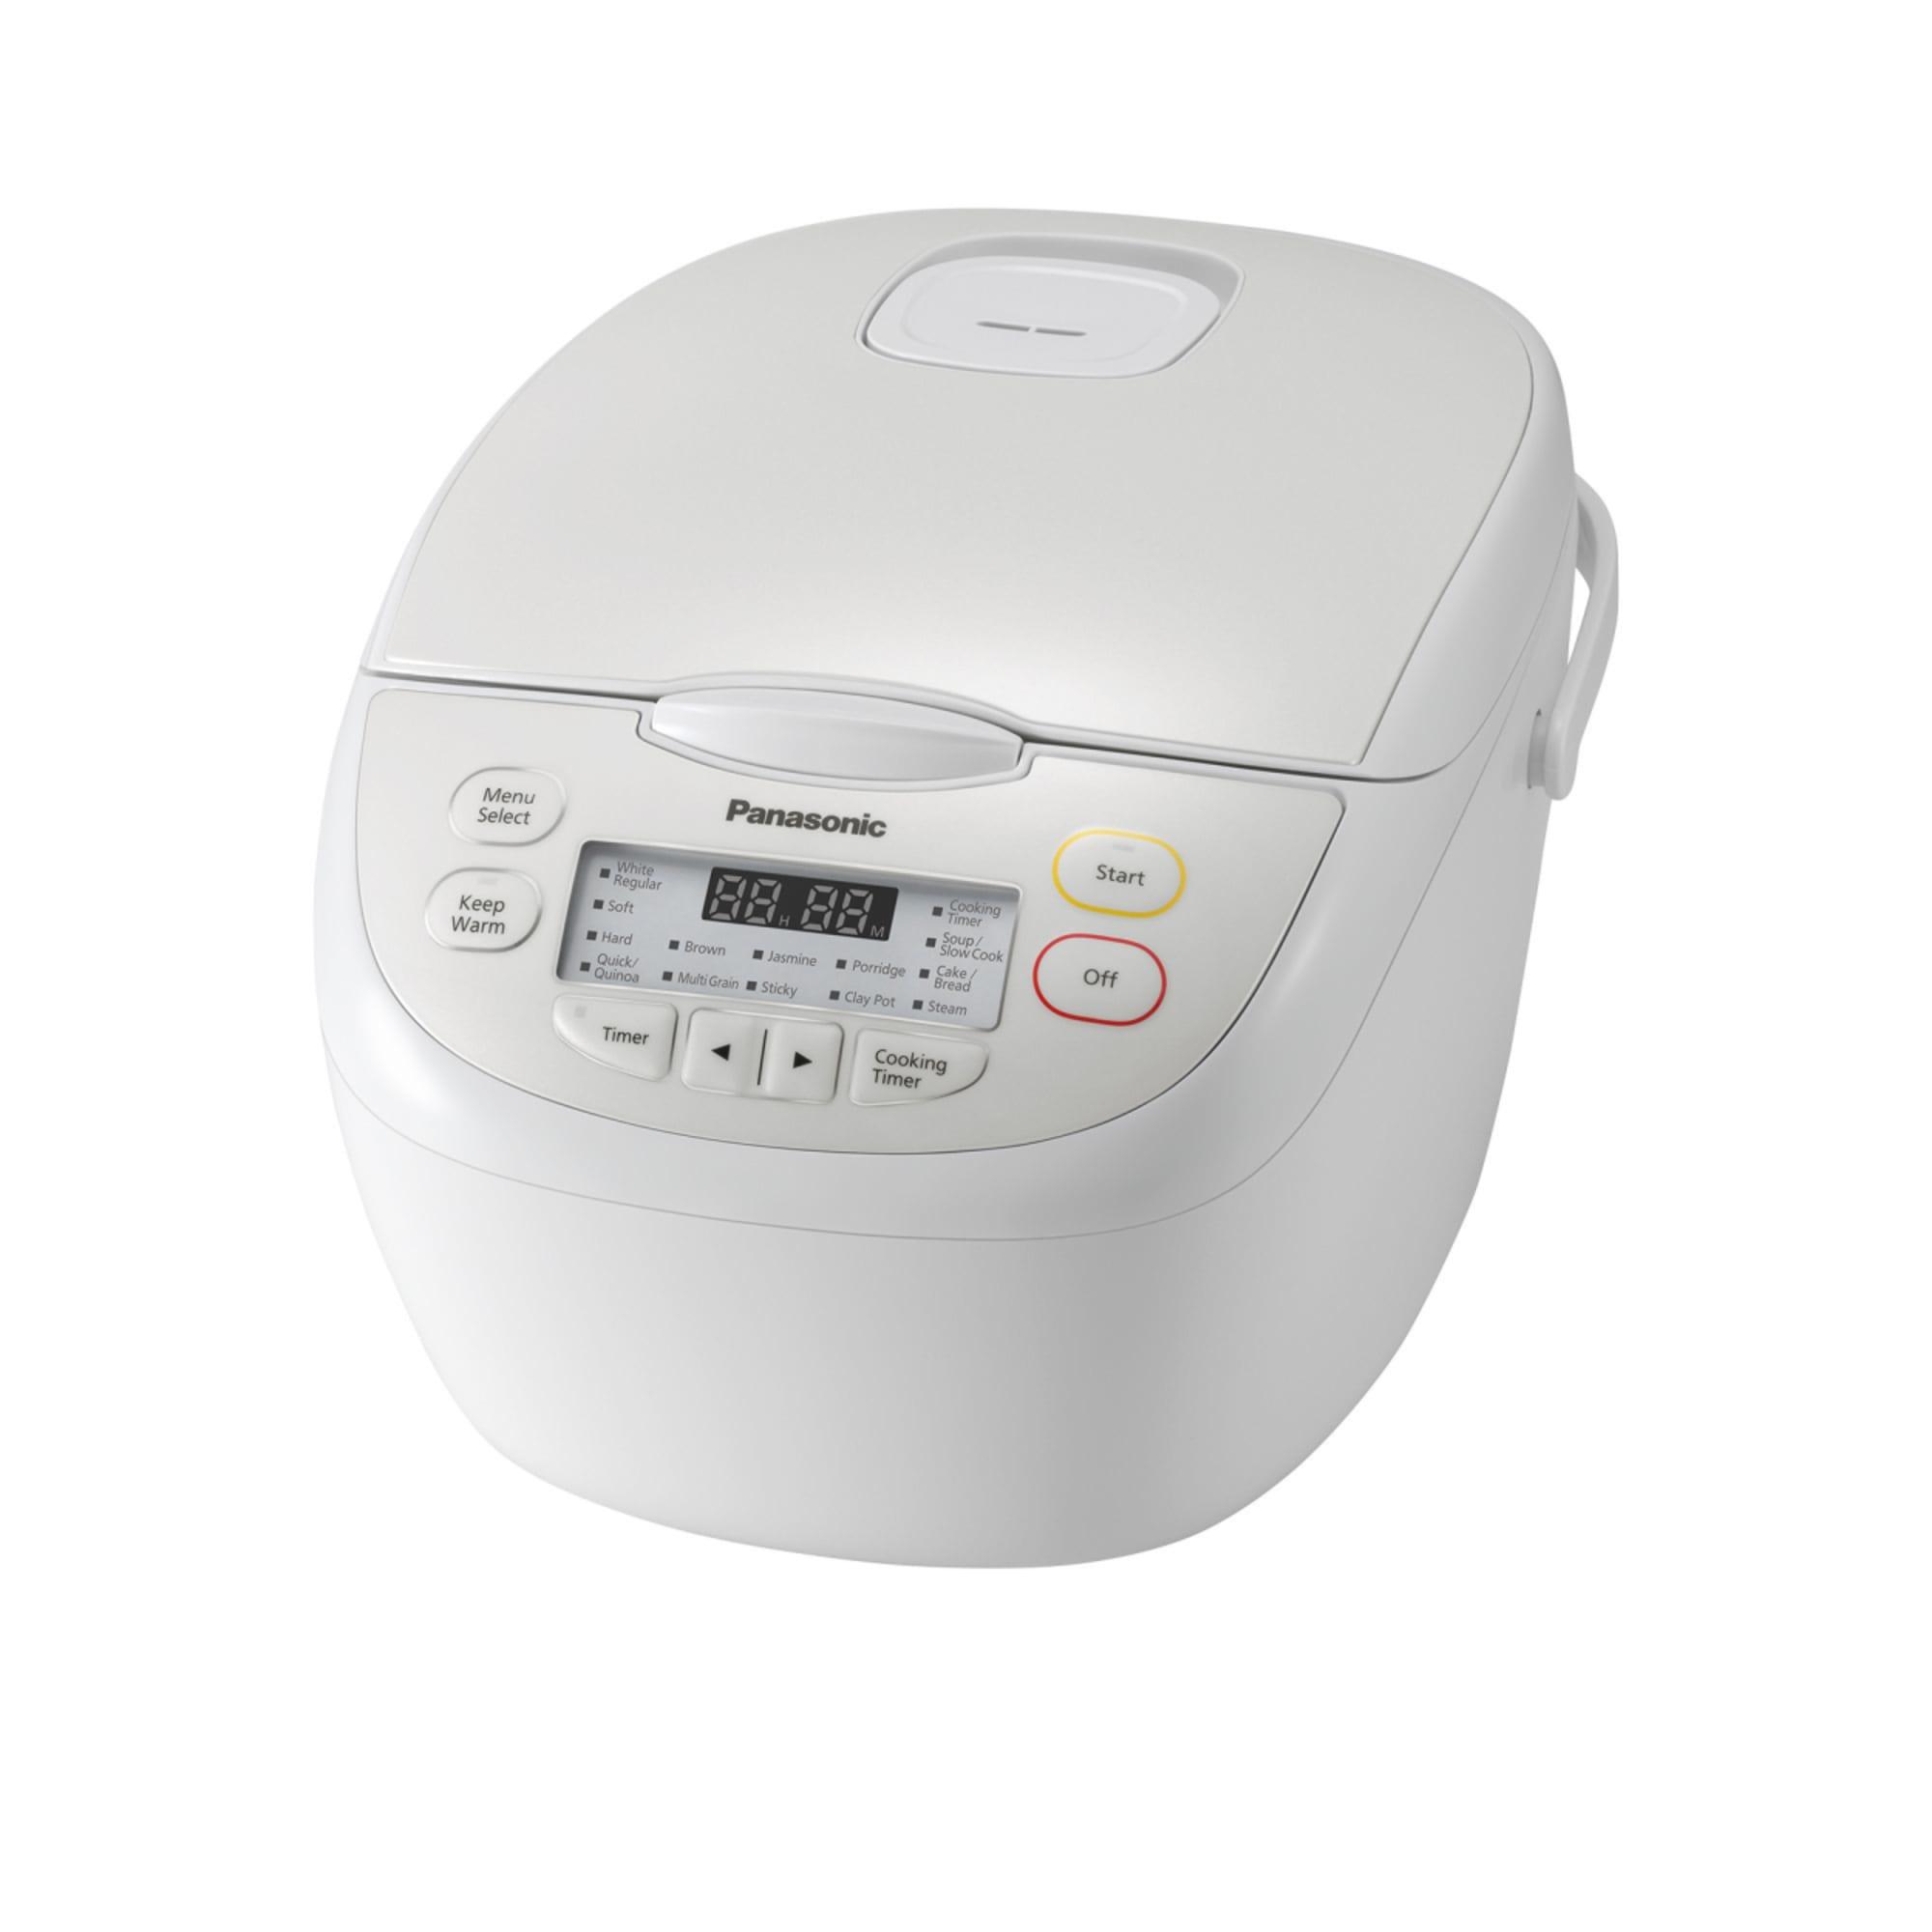 Panasonic Multi Function Rice Cooker 10 Cup White Image 11